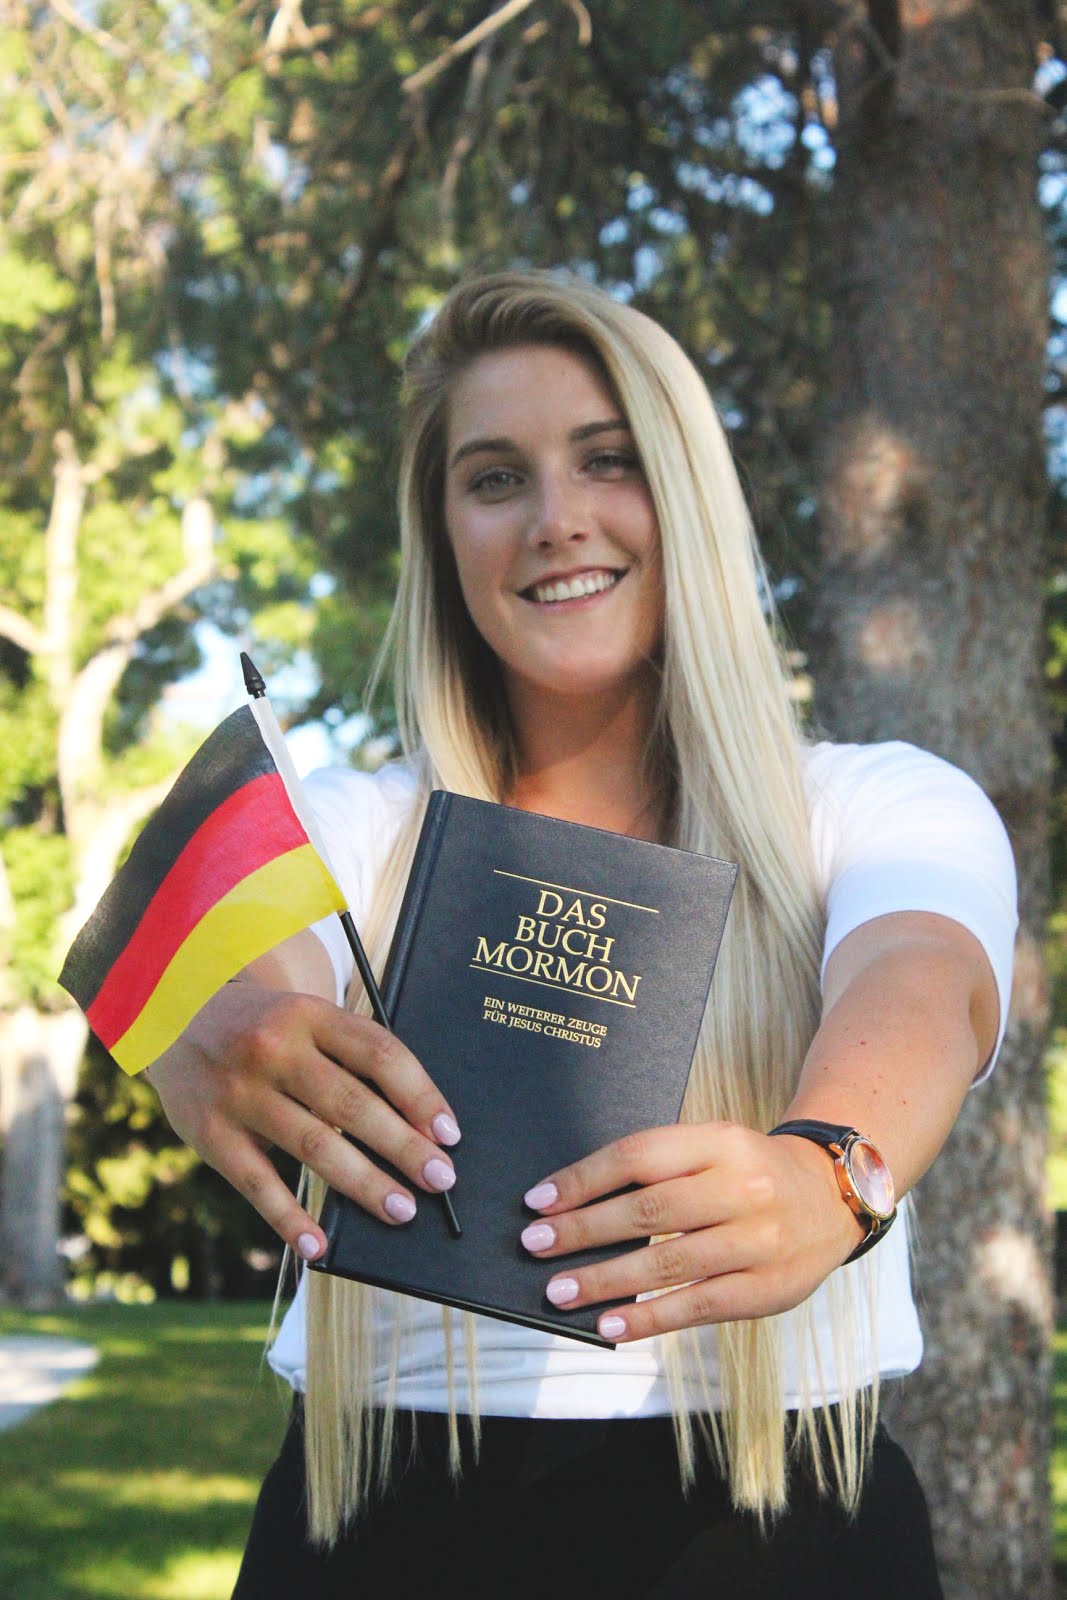 So excited to be serving the Lord and speaking German for the next 18 months!